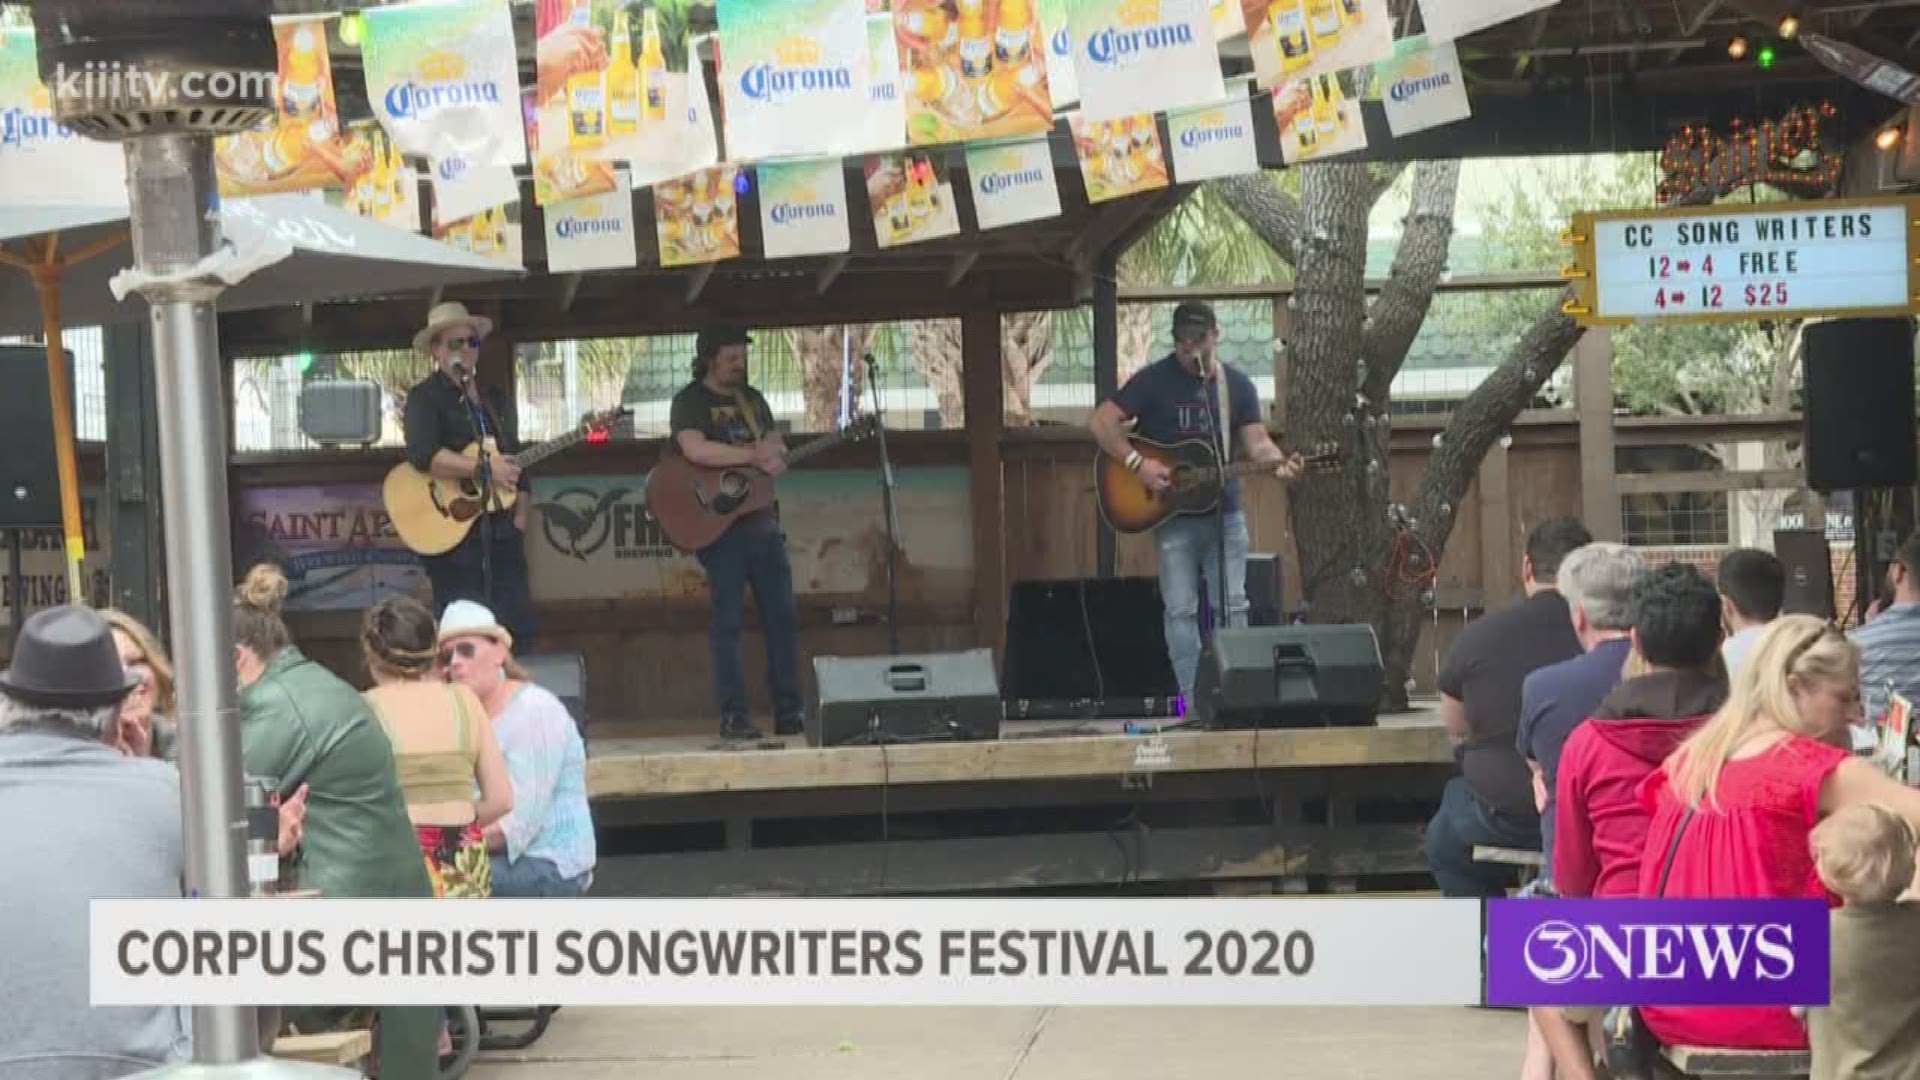 The festival promotes and celebrates original music from local musicians and even songwriters from around the country.